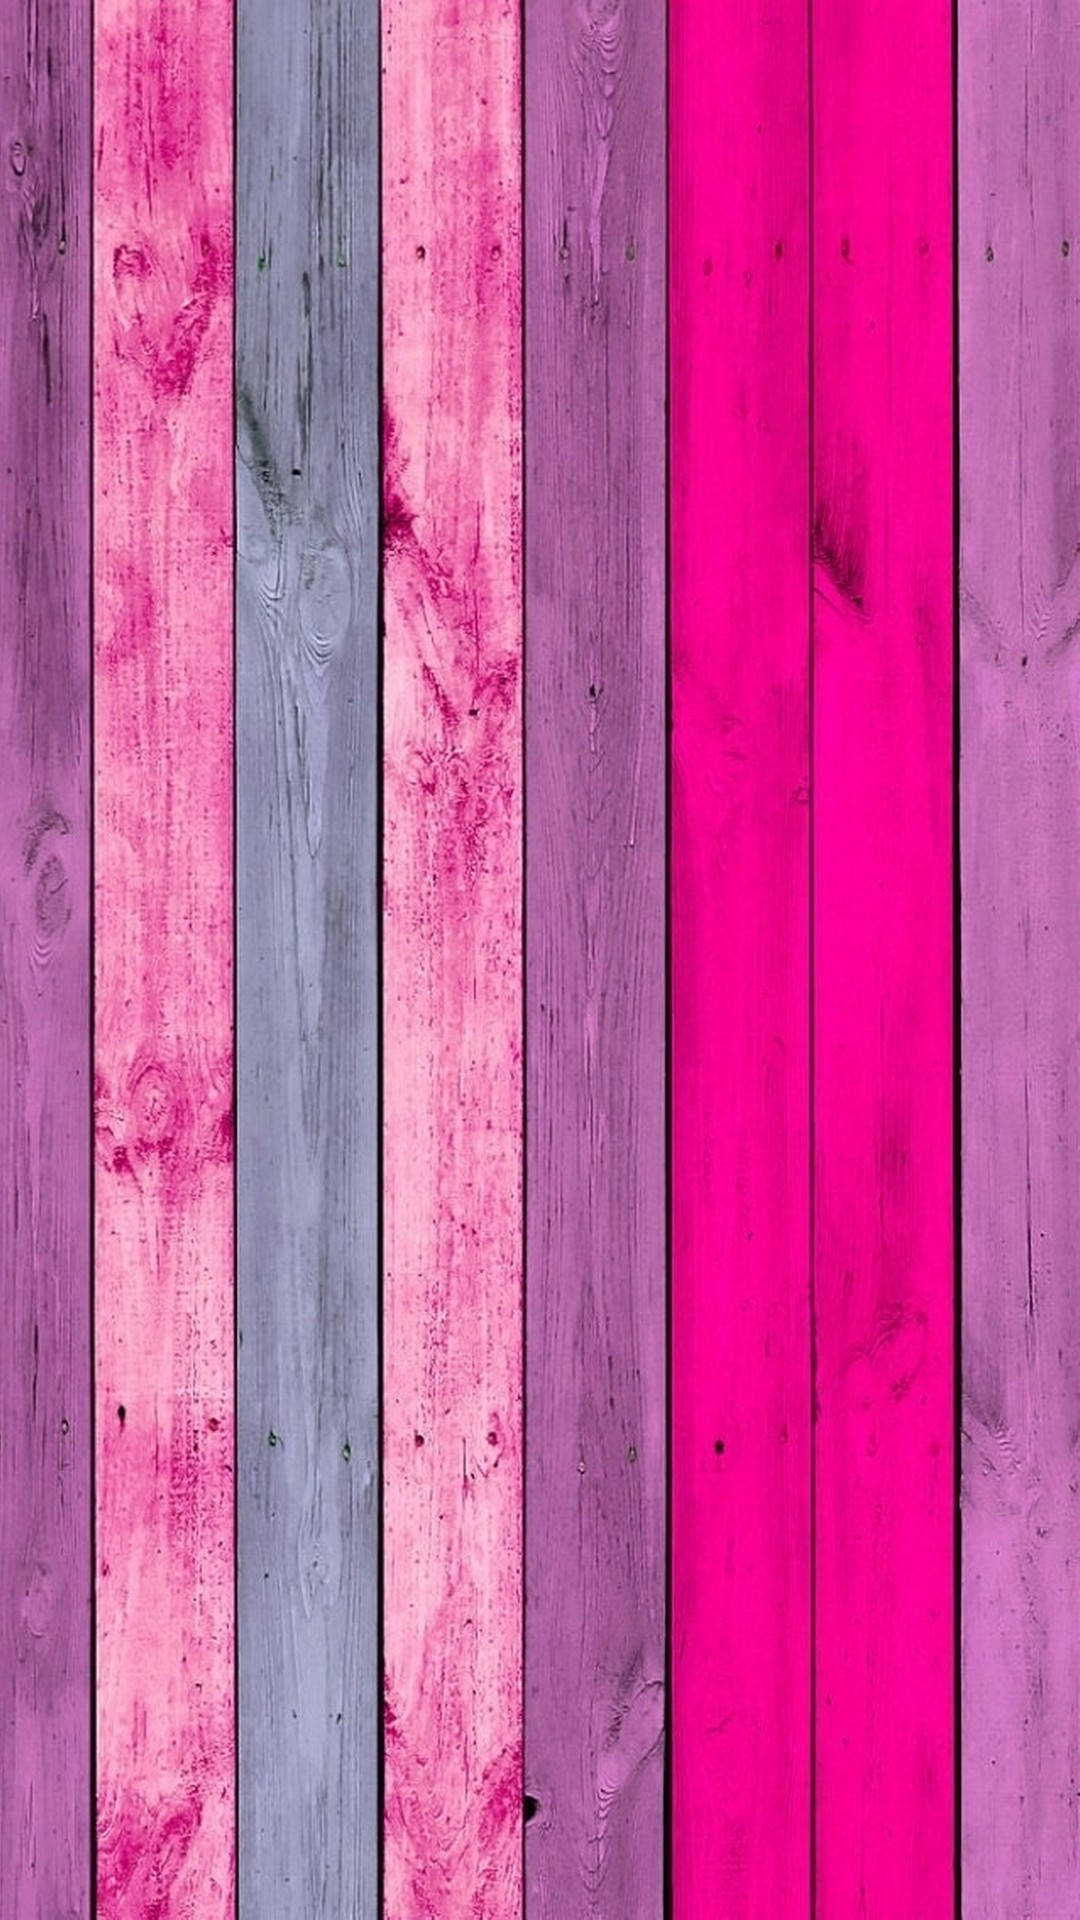 Pink Wooden Boards Girly Iphone